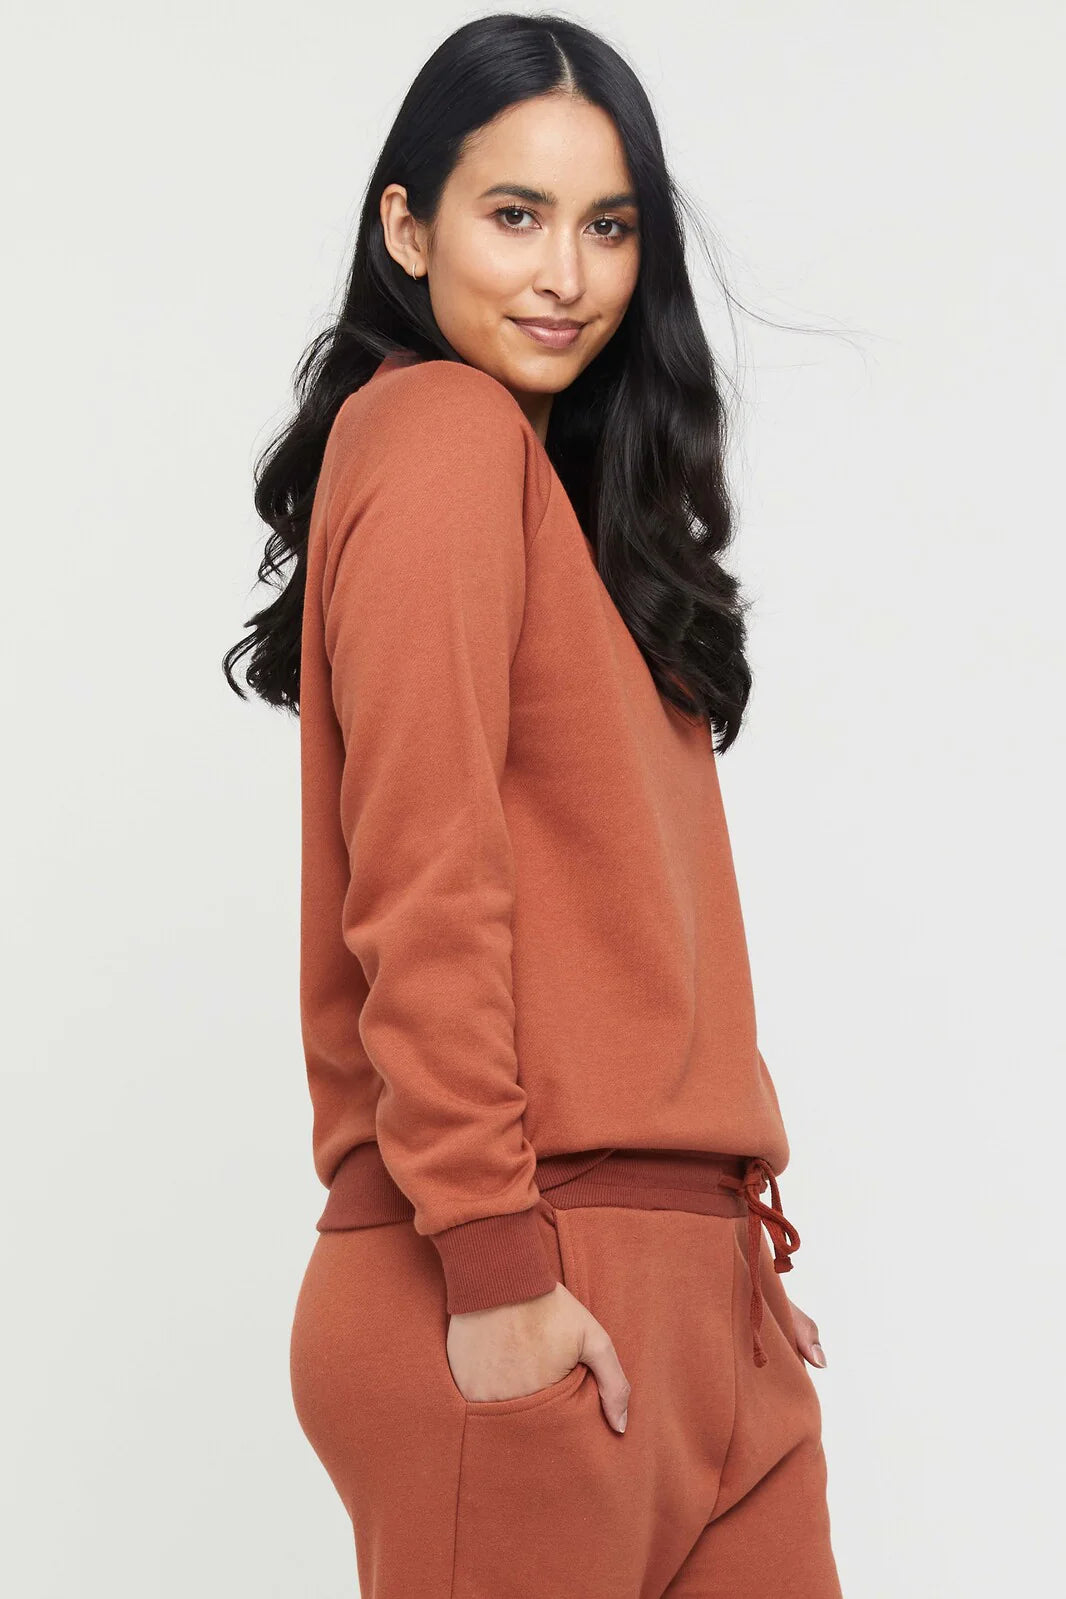 "Stylish bamboo jumper for women: Rust hue combines elegance and eco-consciousness in clothing."